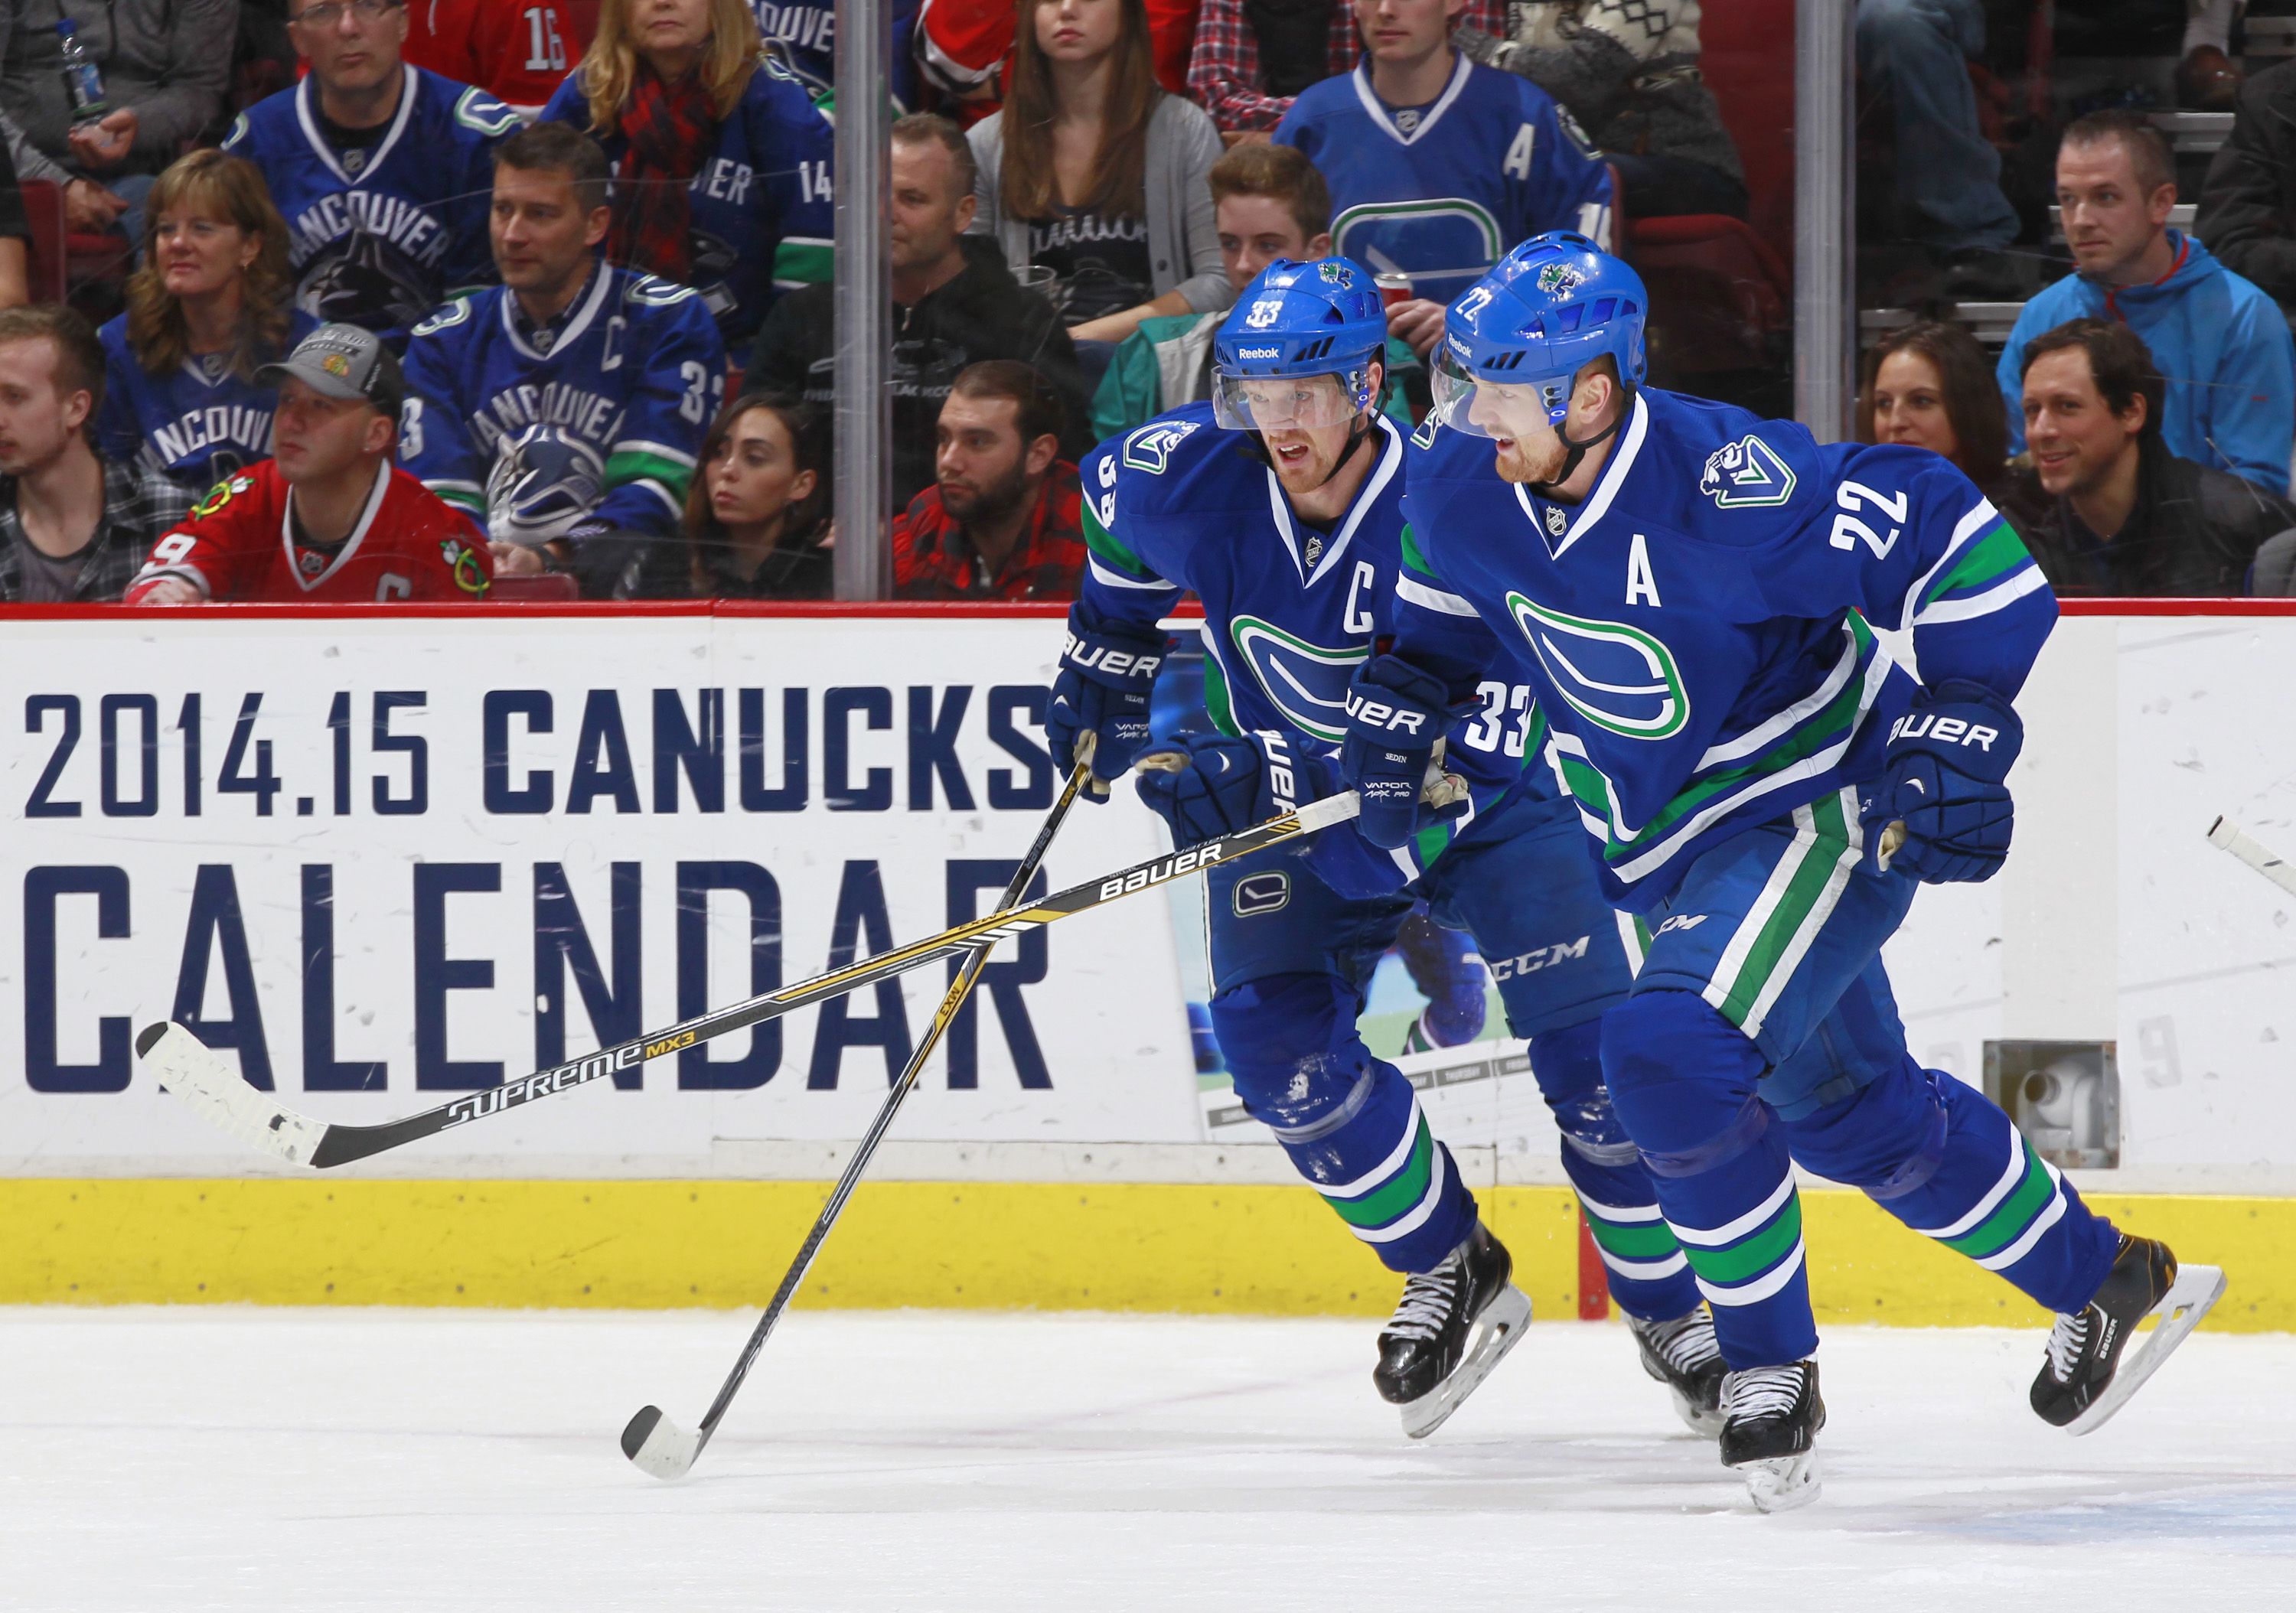 VANCOUVER, BC - NOVEMBER 23: Henrik Sedin #33 and Daniel Sedin #22 of the Vancouver Canucks break up ice against the Chicago Blackhawks during their NHL game at Rogers Arena November 23, 2014 in Vancouver, British Columbia, Canada. Vancouver won 4-1. (Photo by Jeff Vinnick/NHLI via Getty Images)